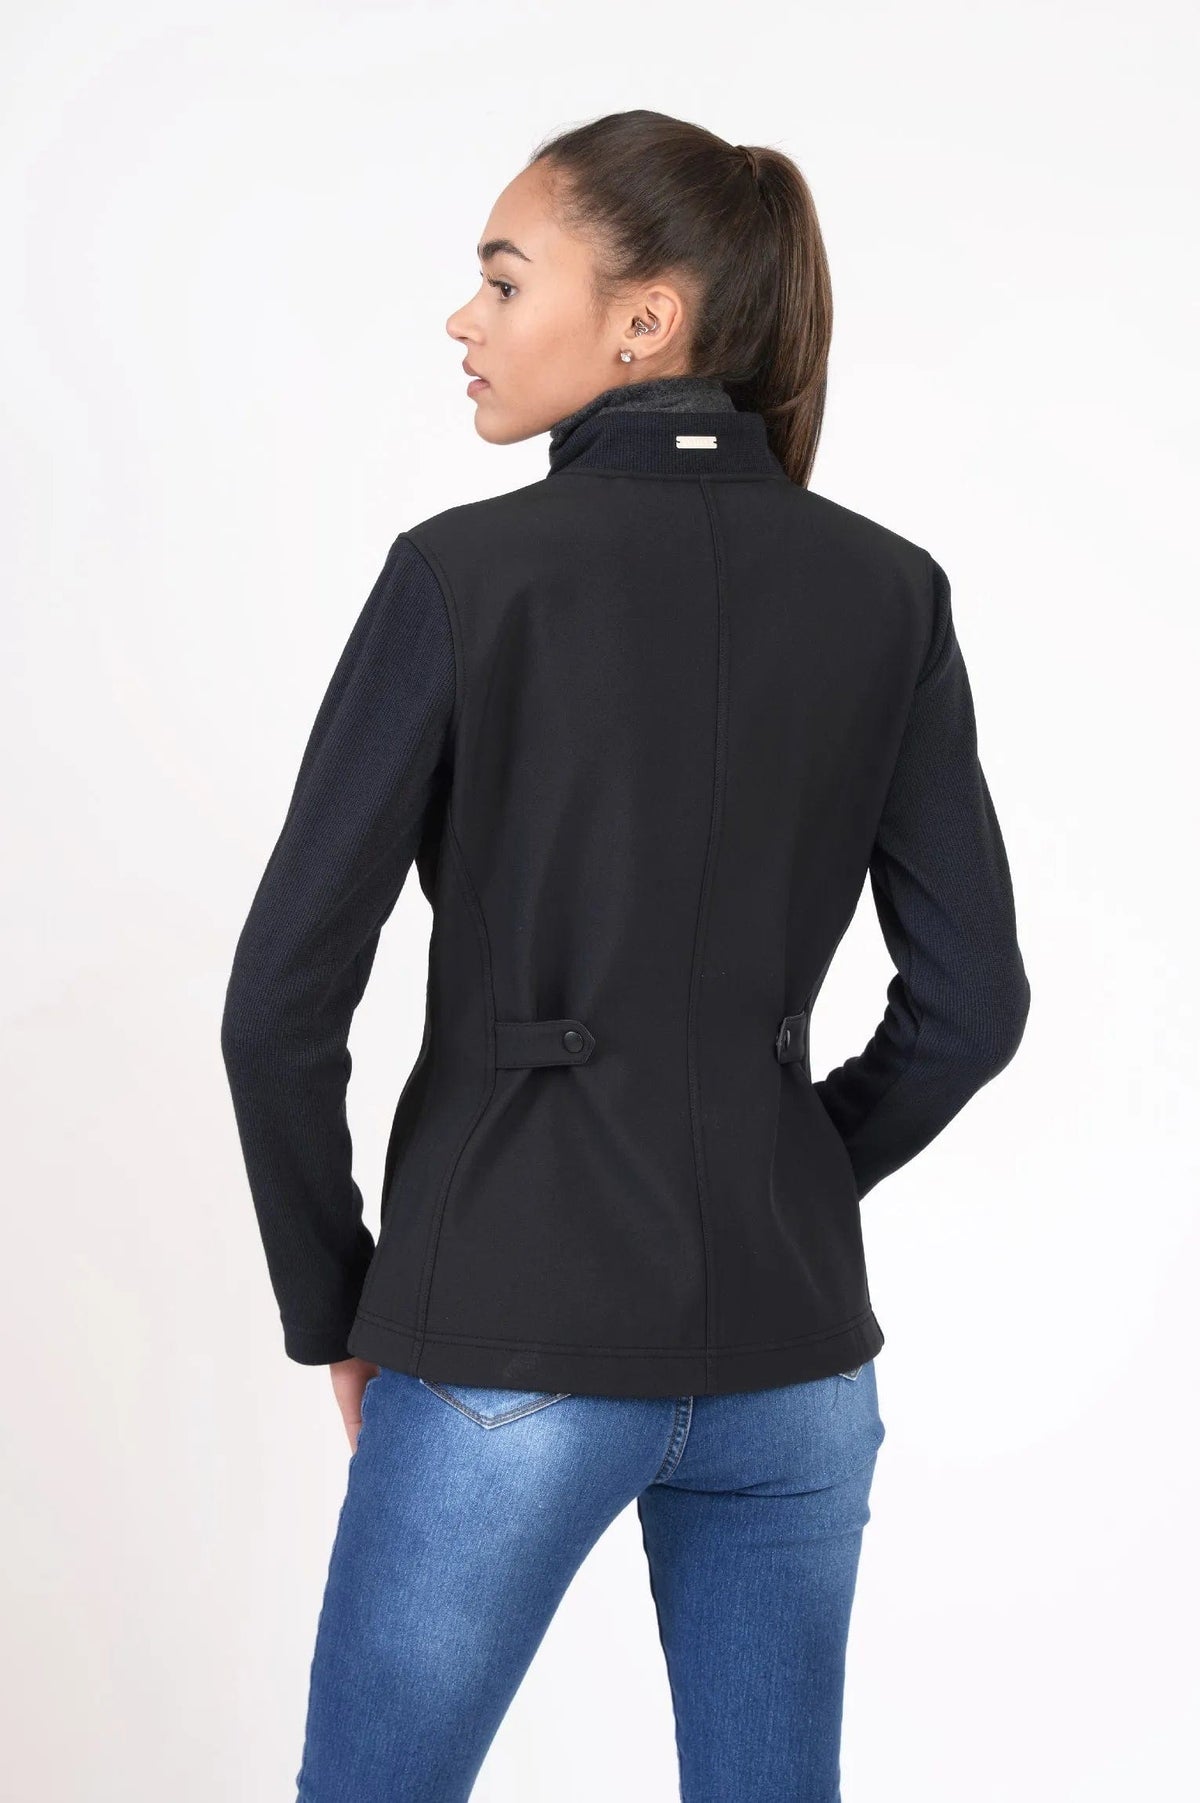 Chestnut Bay Women's jacket Street to Stable Jacket equestrian team apparel online tack store mobile tack store custom farm apparel custom show stable clothing equestrian lifestyle horse show clothing riding clothes horses equestrian tack store